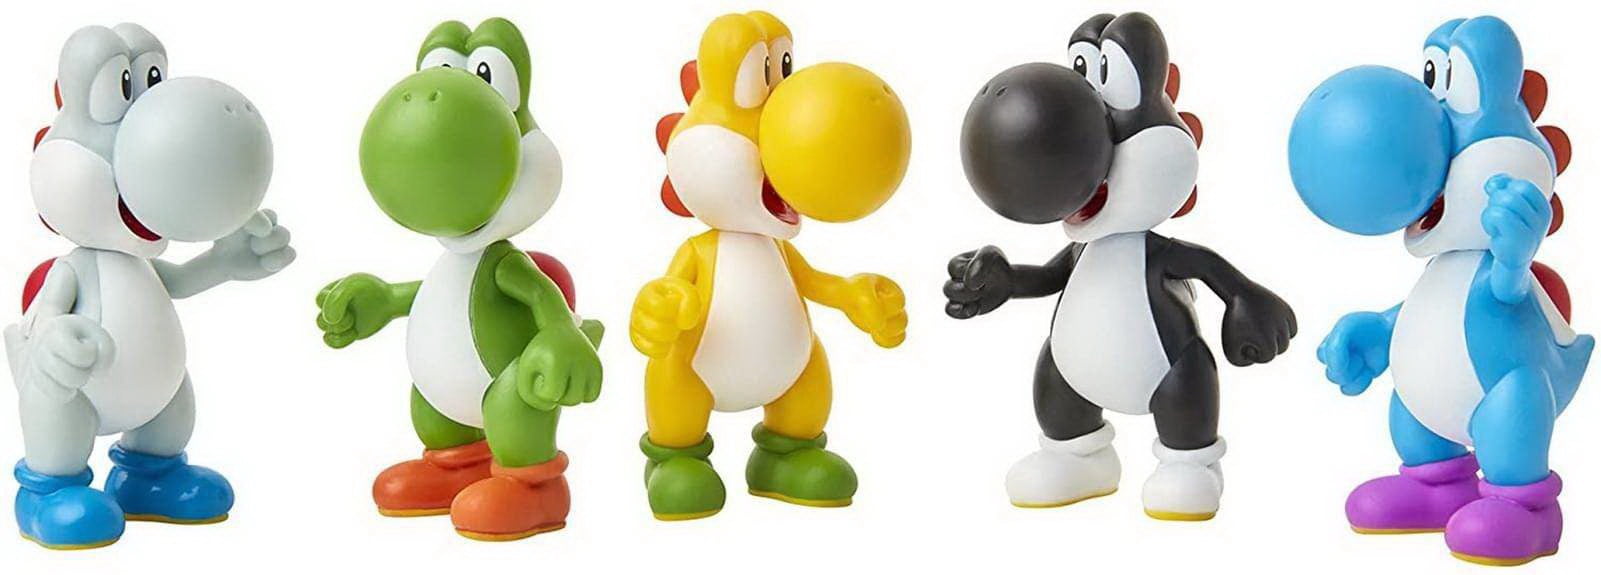 YOSHI MARIO VIDEO GAME DINOSAUR MINIFIGURE FIGURE USA SELLER NEW IN PACKAGE 